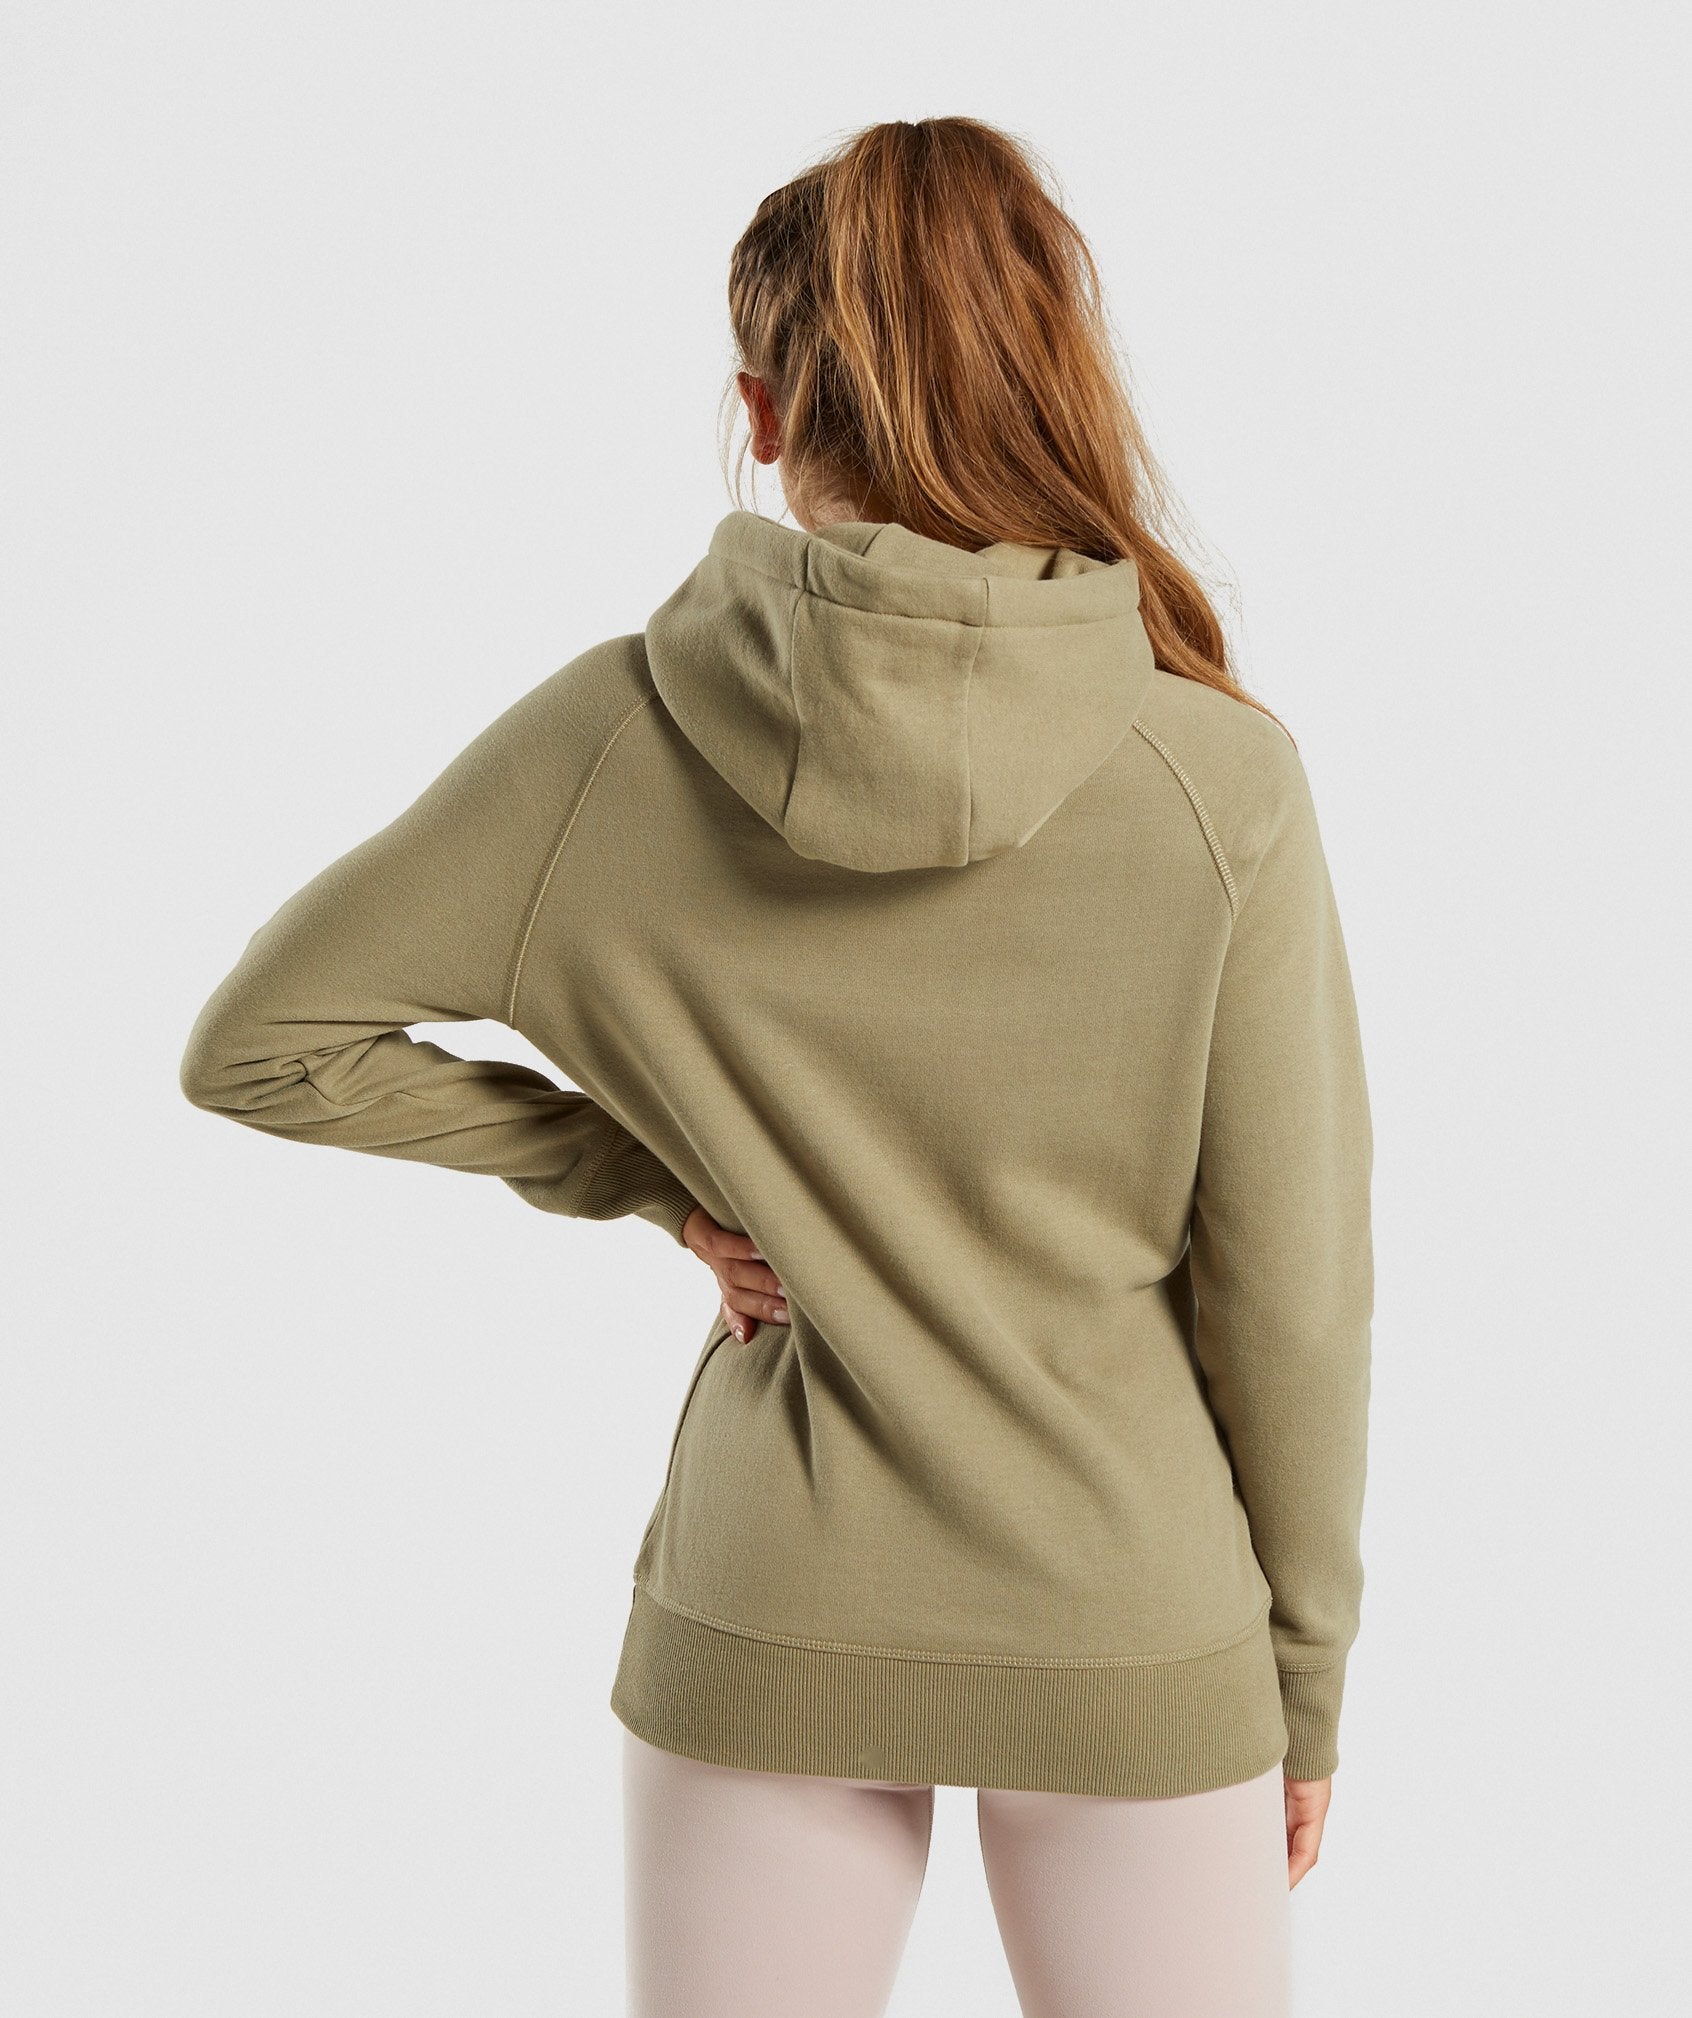 Women's Crest Hoodie in Washed Khaki - view 2